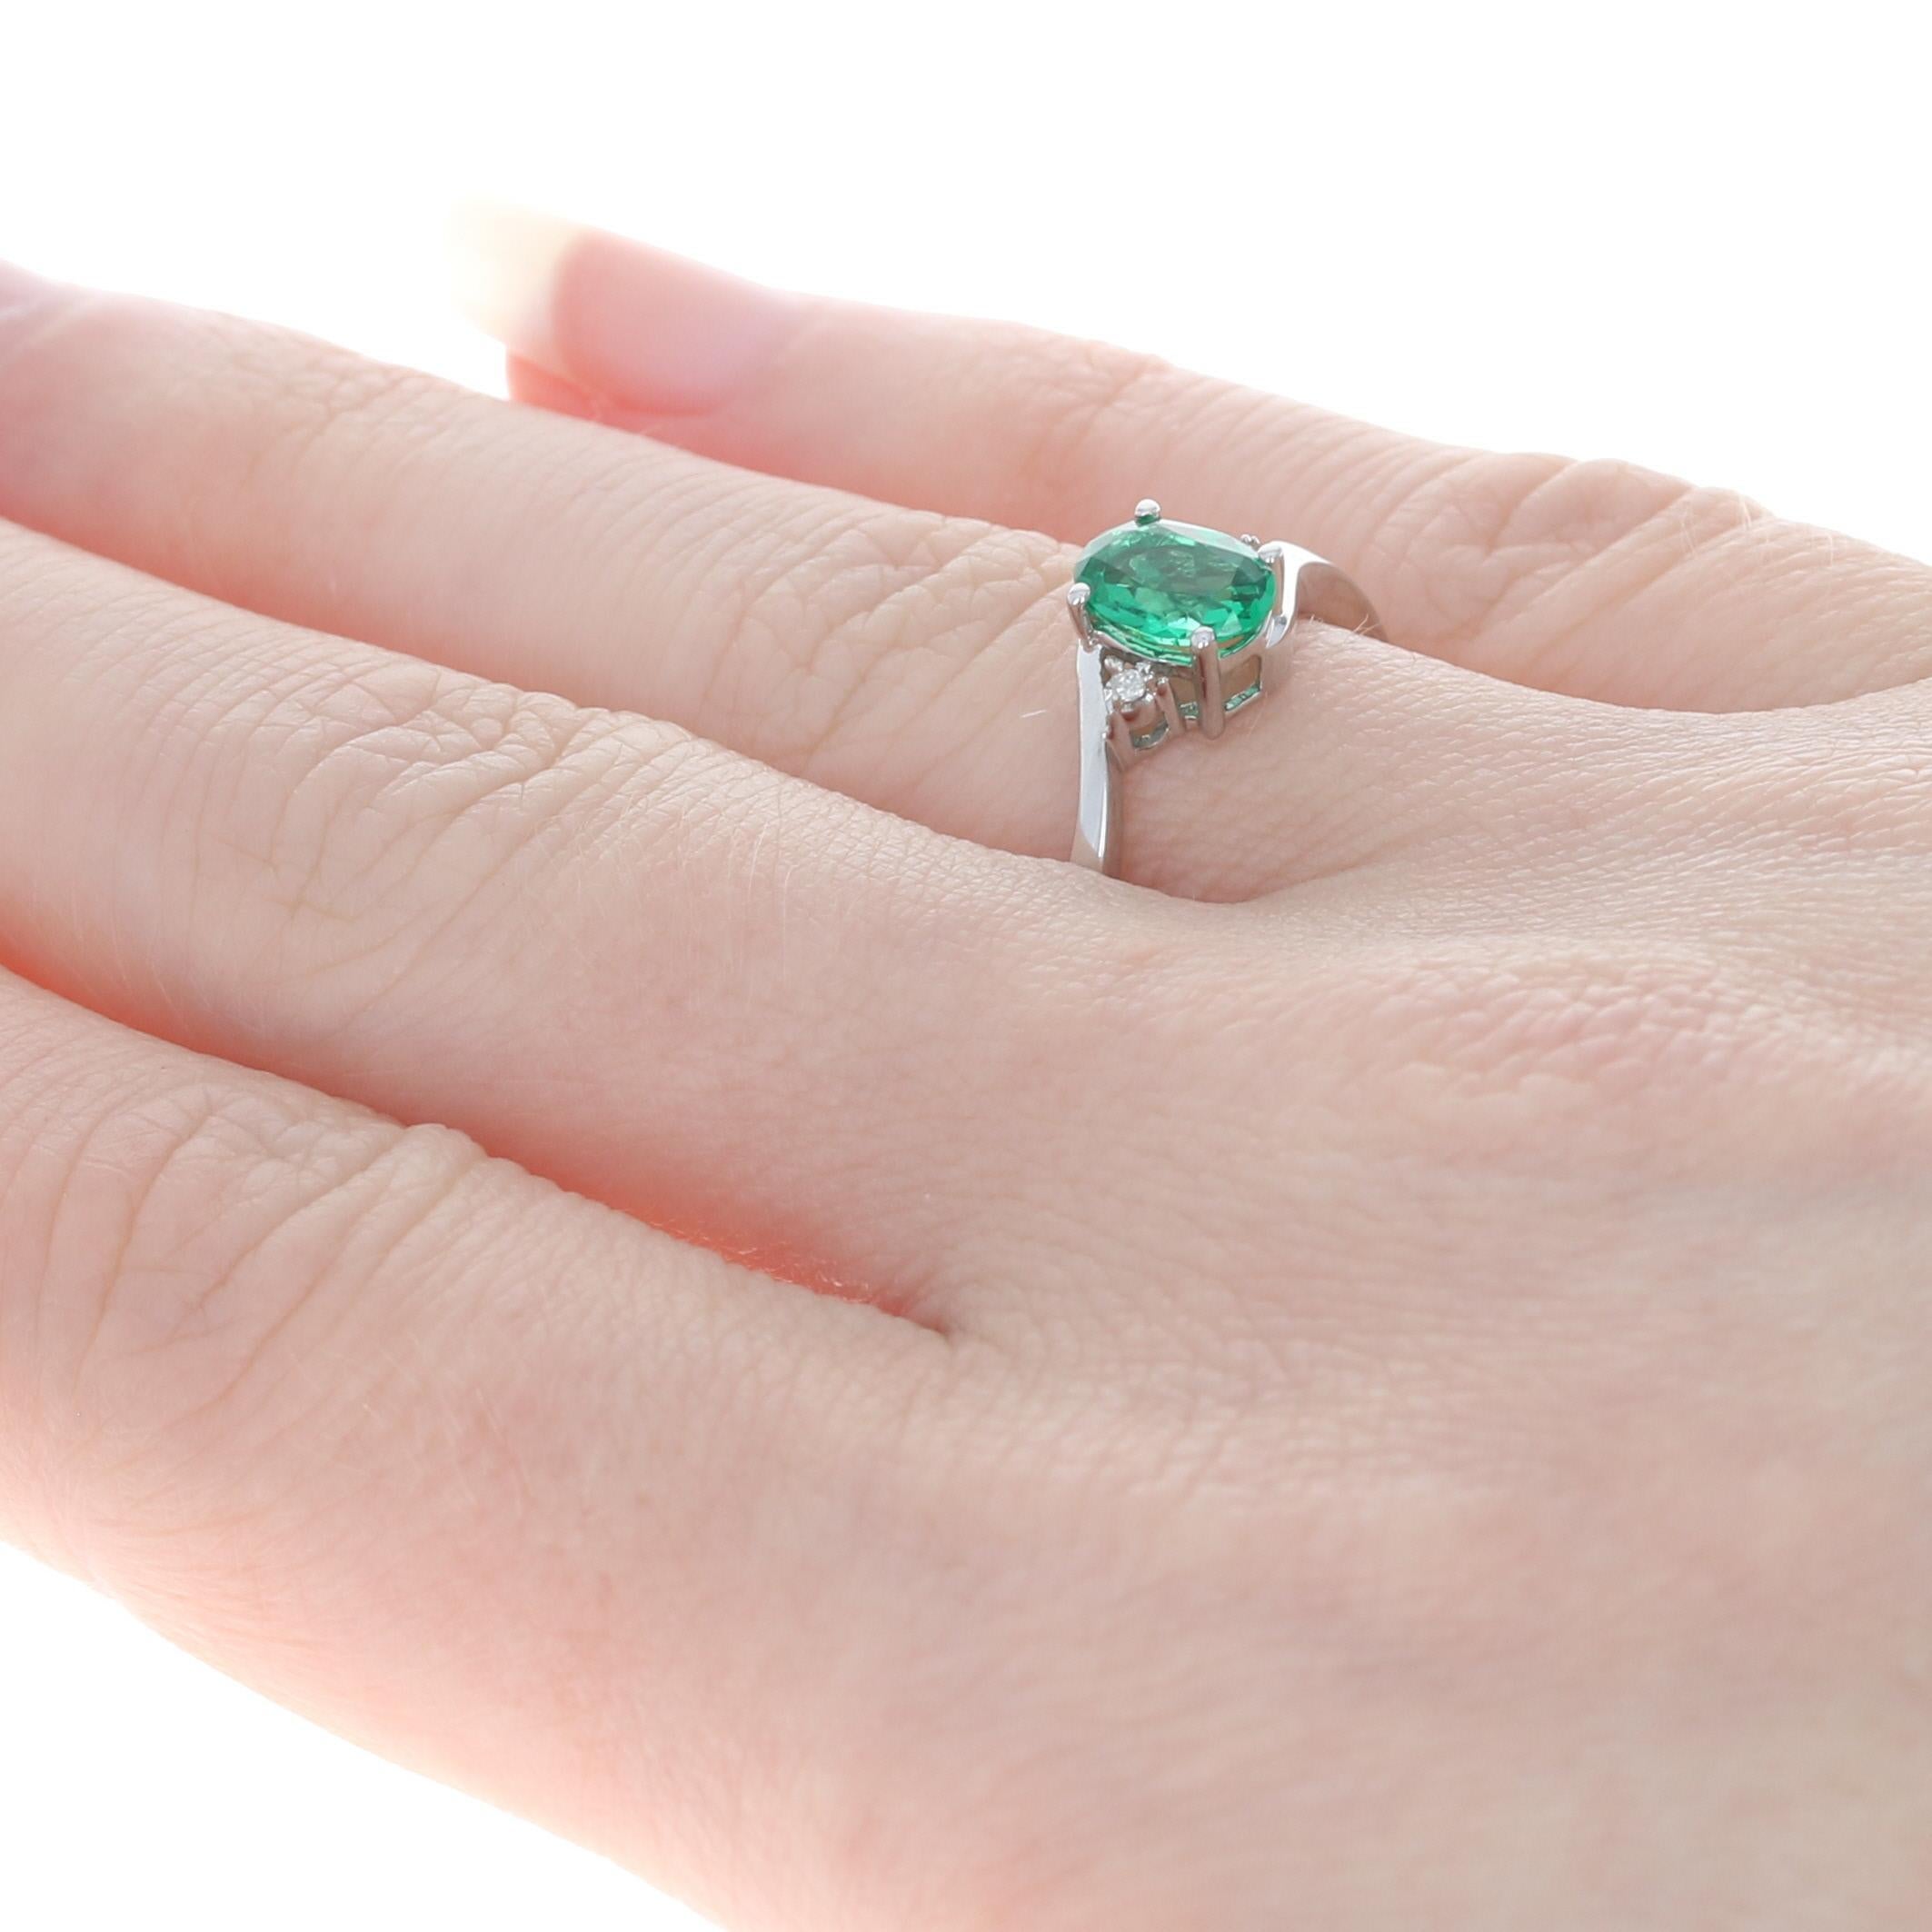 For Sale:  New Synthetic Emerald & Diamond Ring, 10k White Gold Bypass .86ctw 4